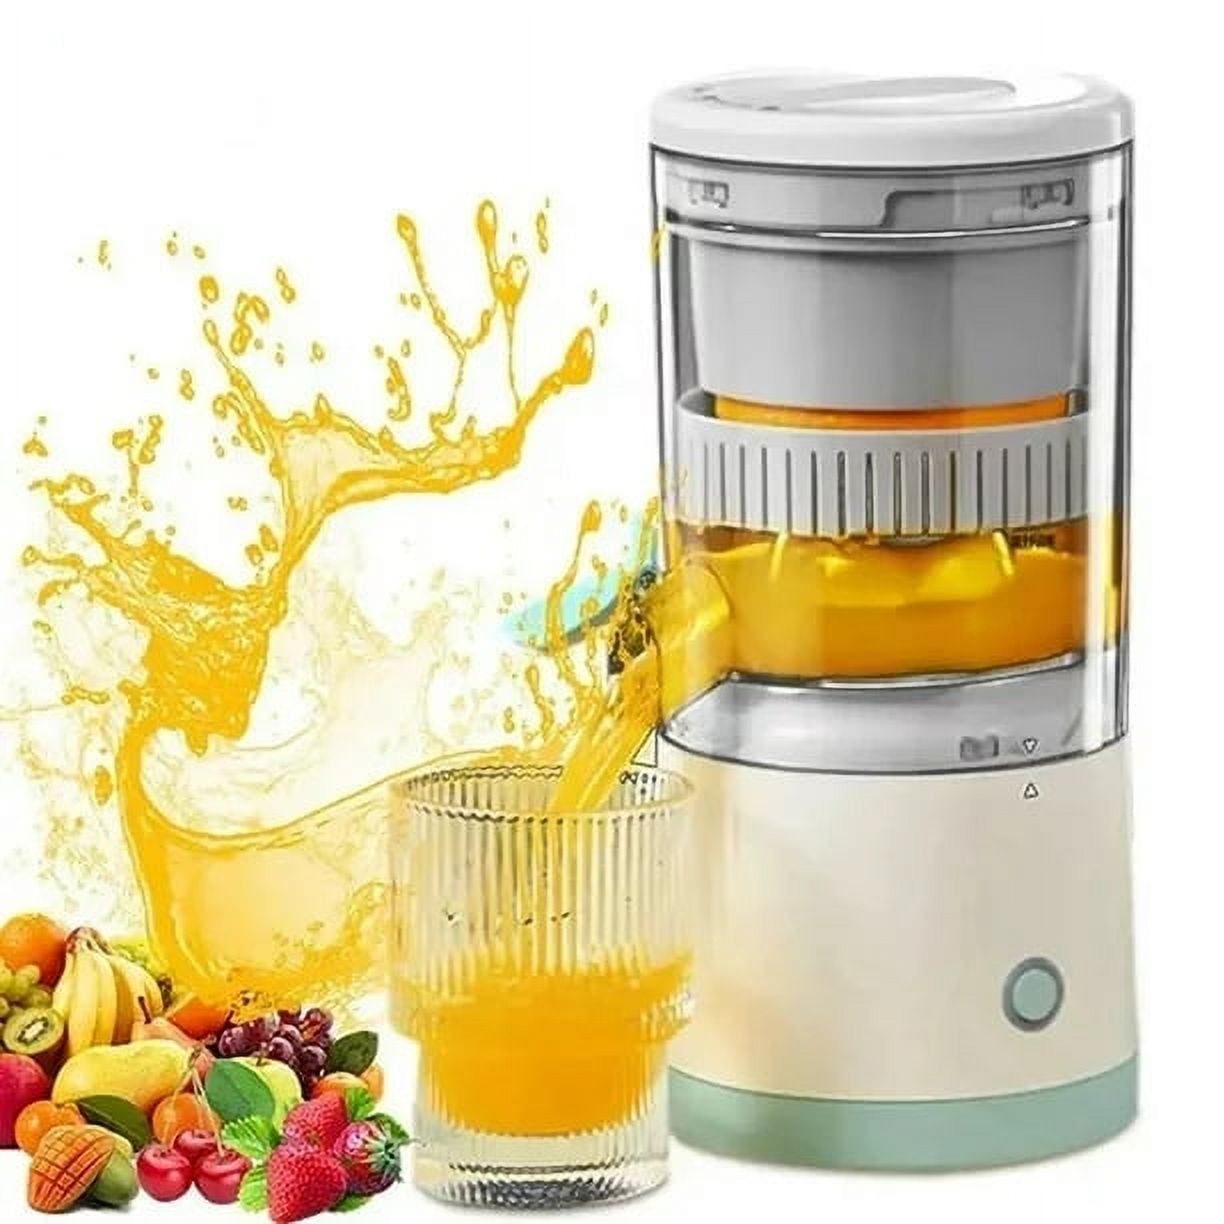 Portable USB Orange Juicer Rechargeable Multifunctional Household Juice Machine Mini Juicer Cup Electric Juicer 45W Wireless, Size: 2400mAh Dual